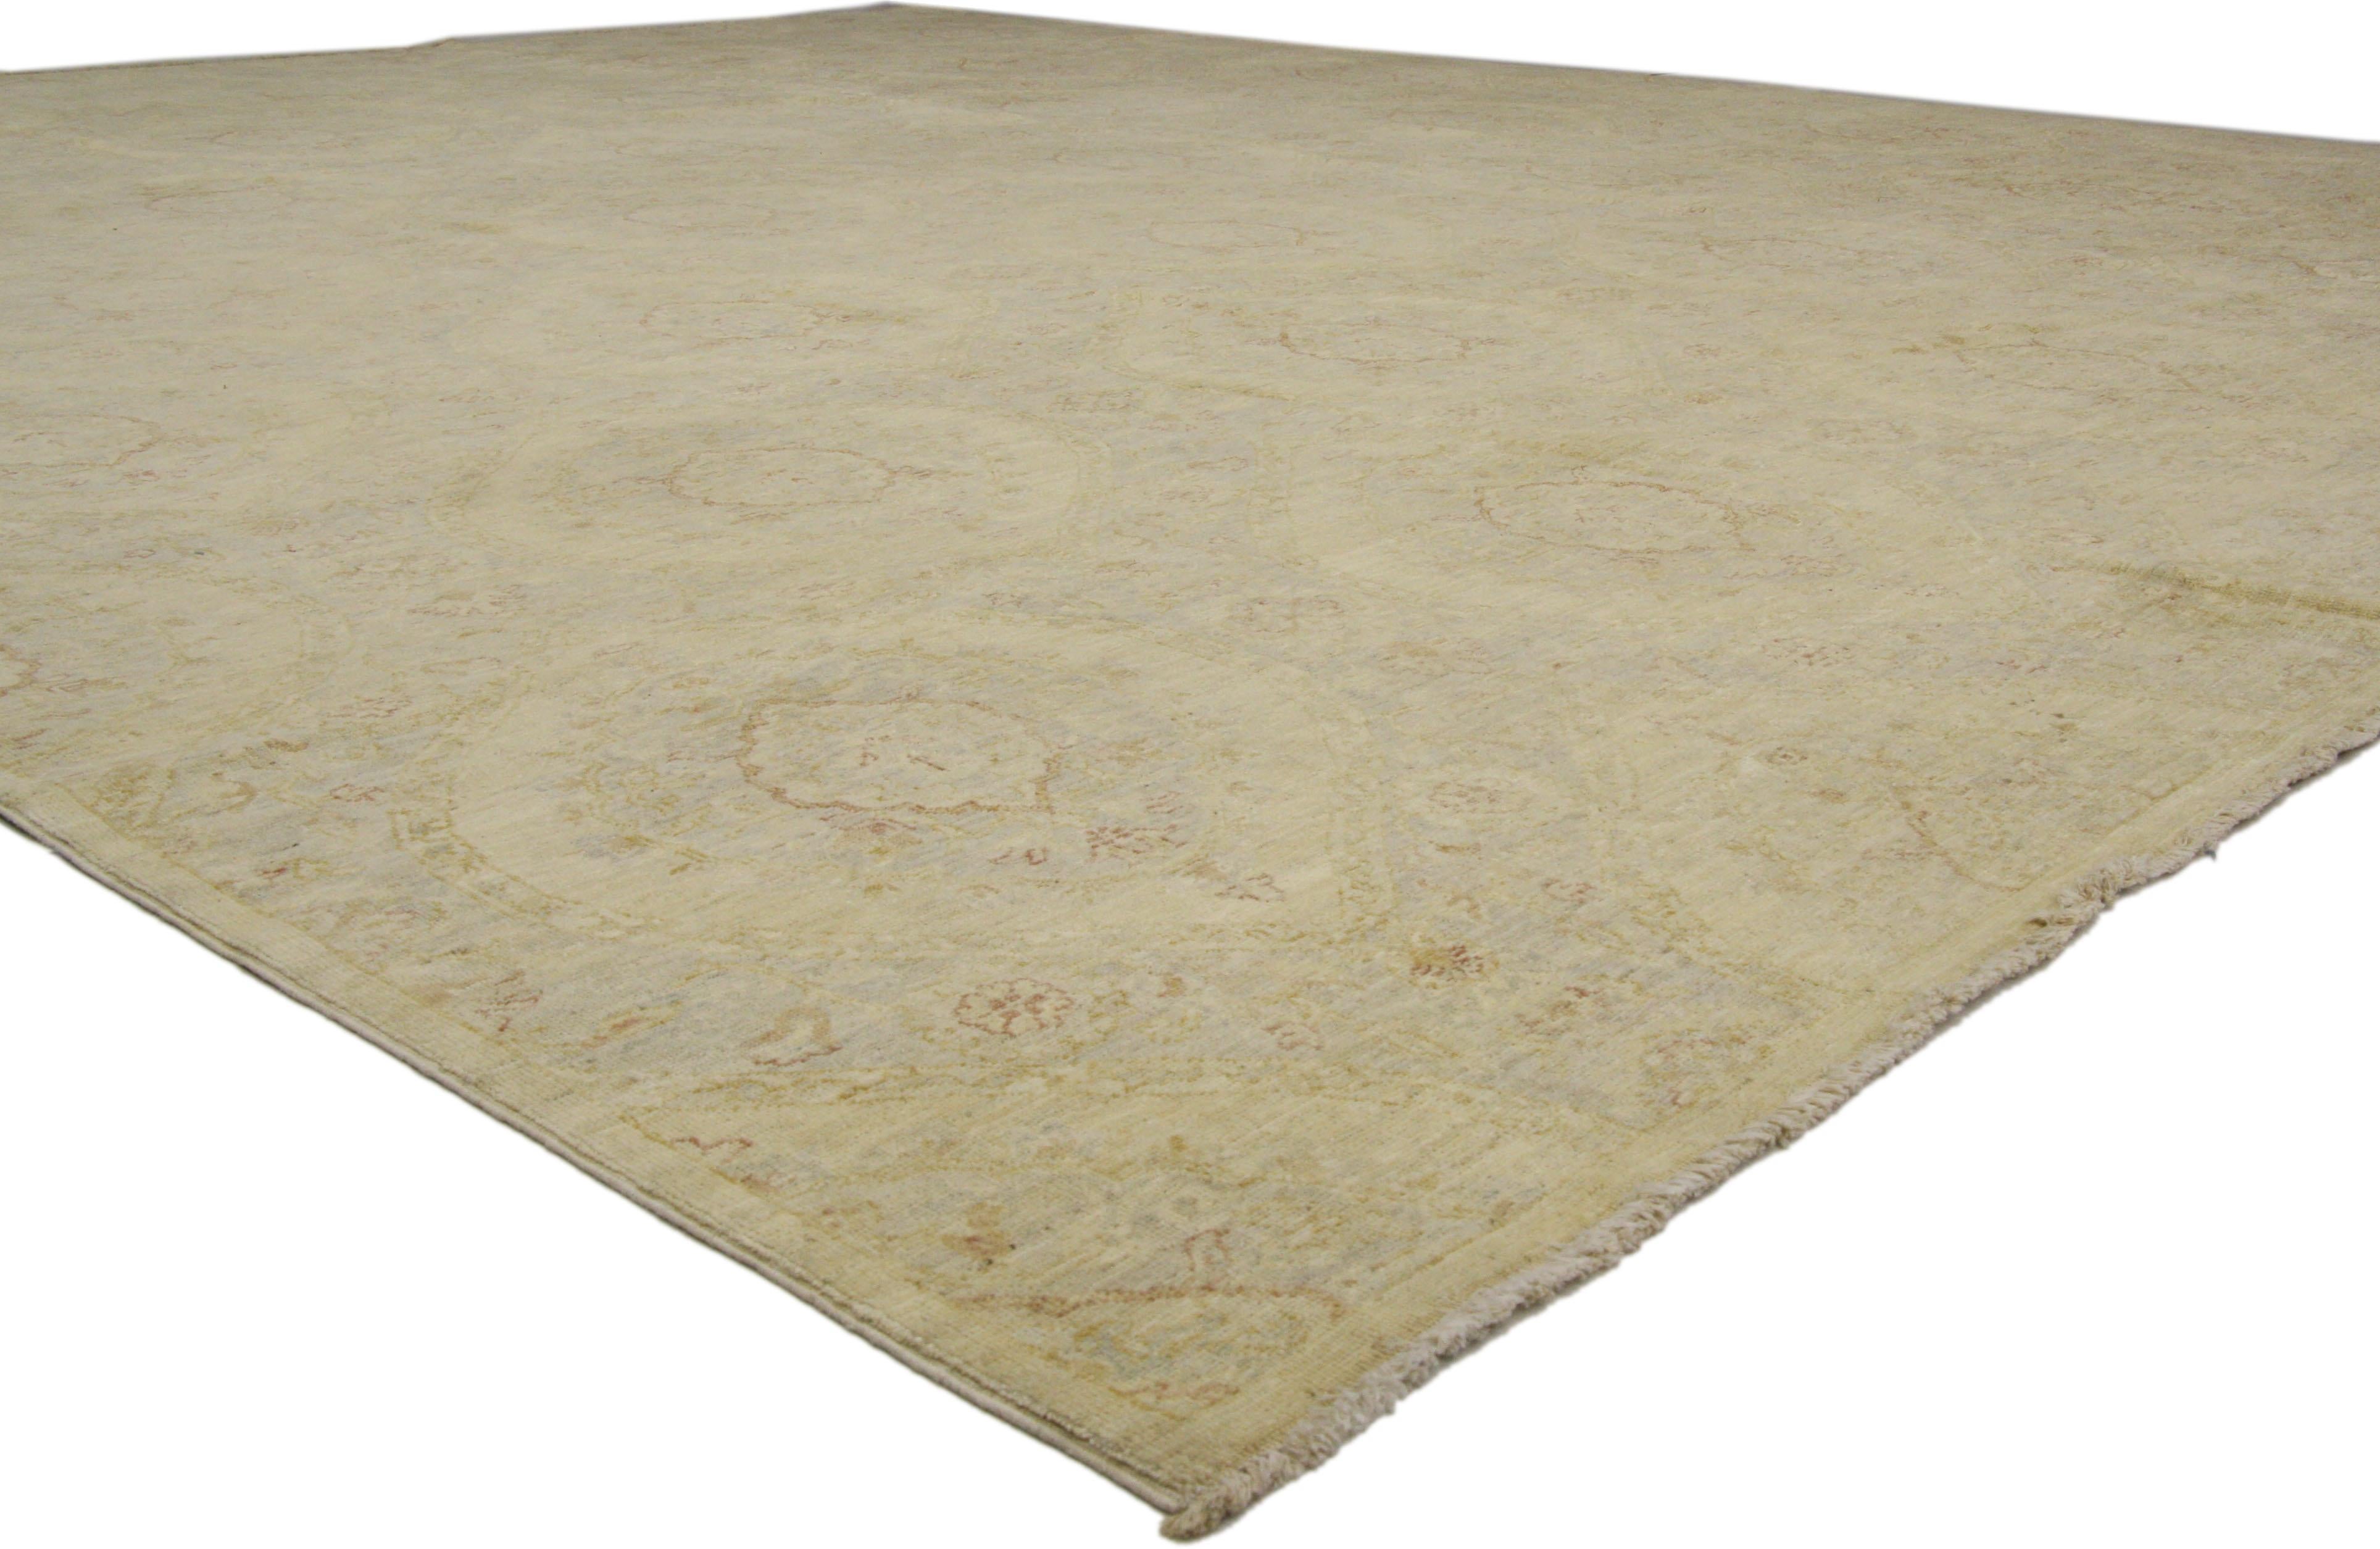 80177 New Transitional Area Rug with French Provincial Georgian Style and Ogee Pattern. This hand-knotted wool transitional area rug with French Provincial style is sophisticated and subtle without sacrificing elegance. It features an all-over